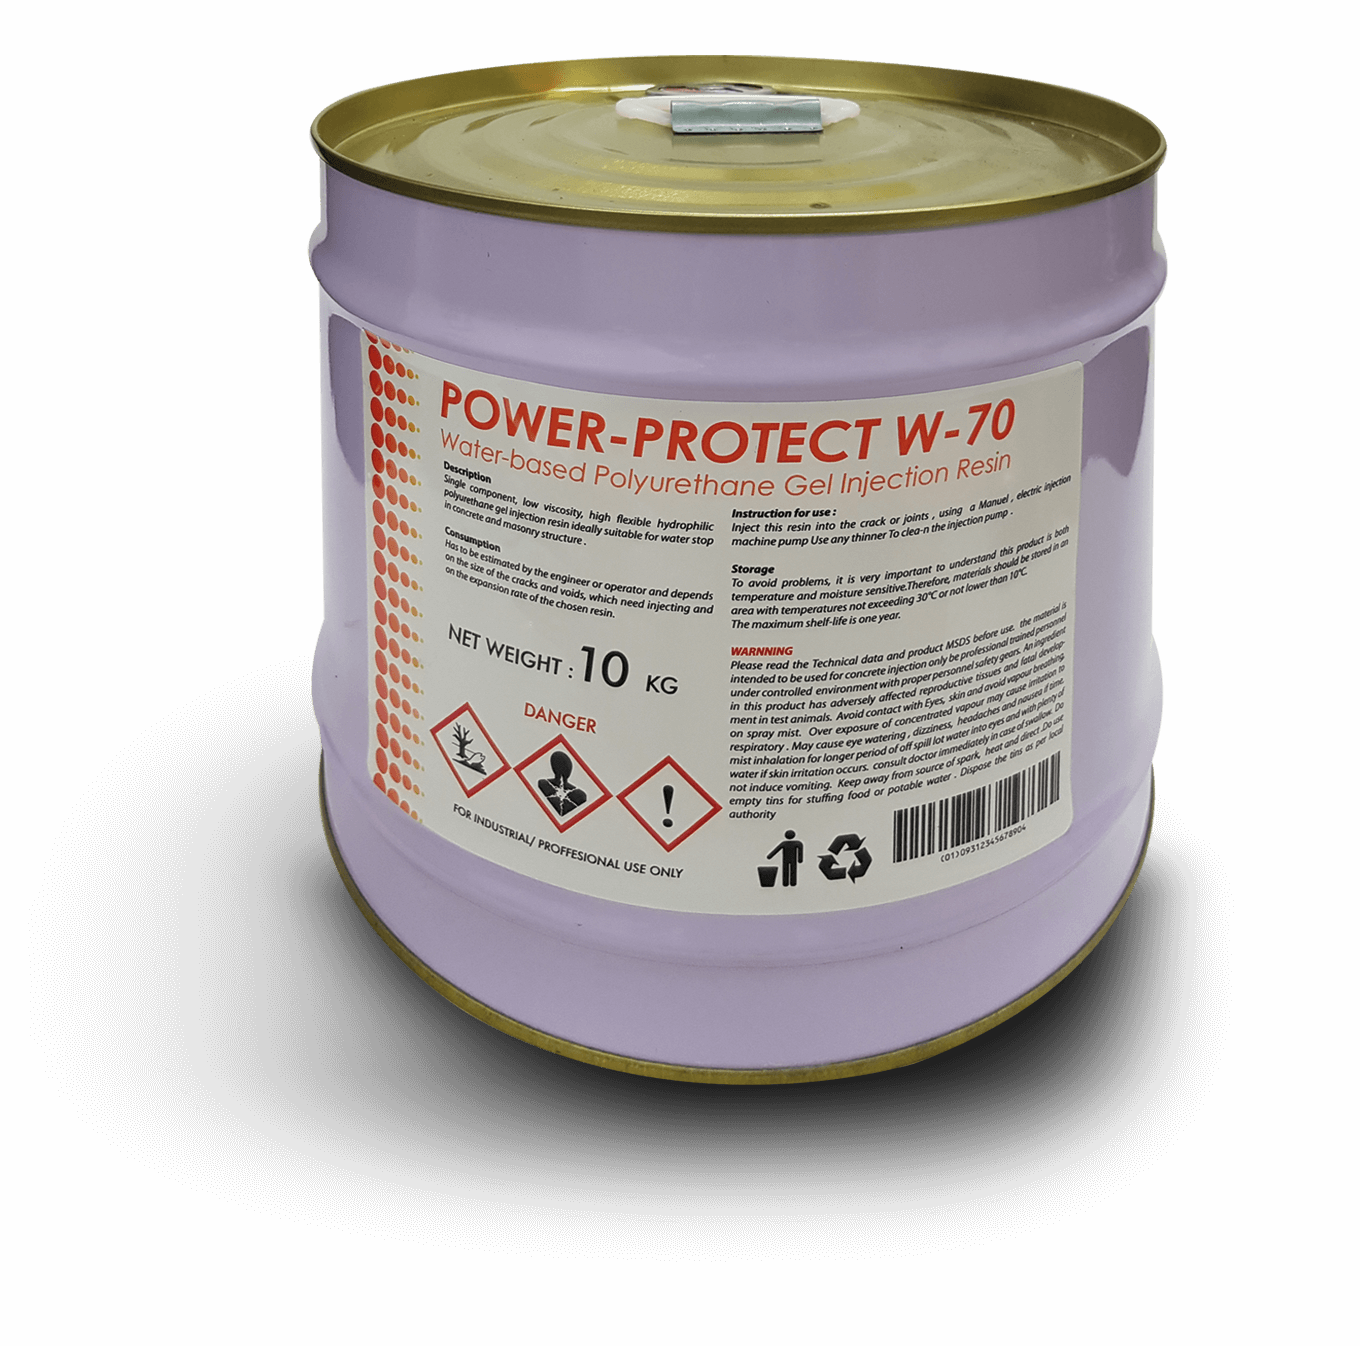 Power-Protect W70 is an Water-based Polyurethane Gel Injection Resin